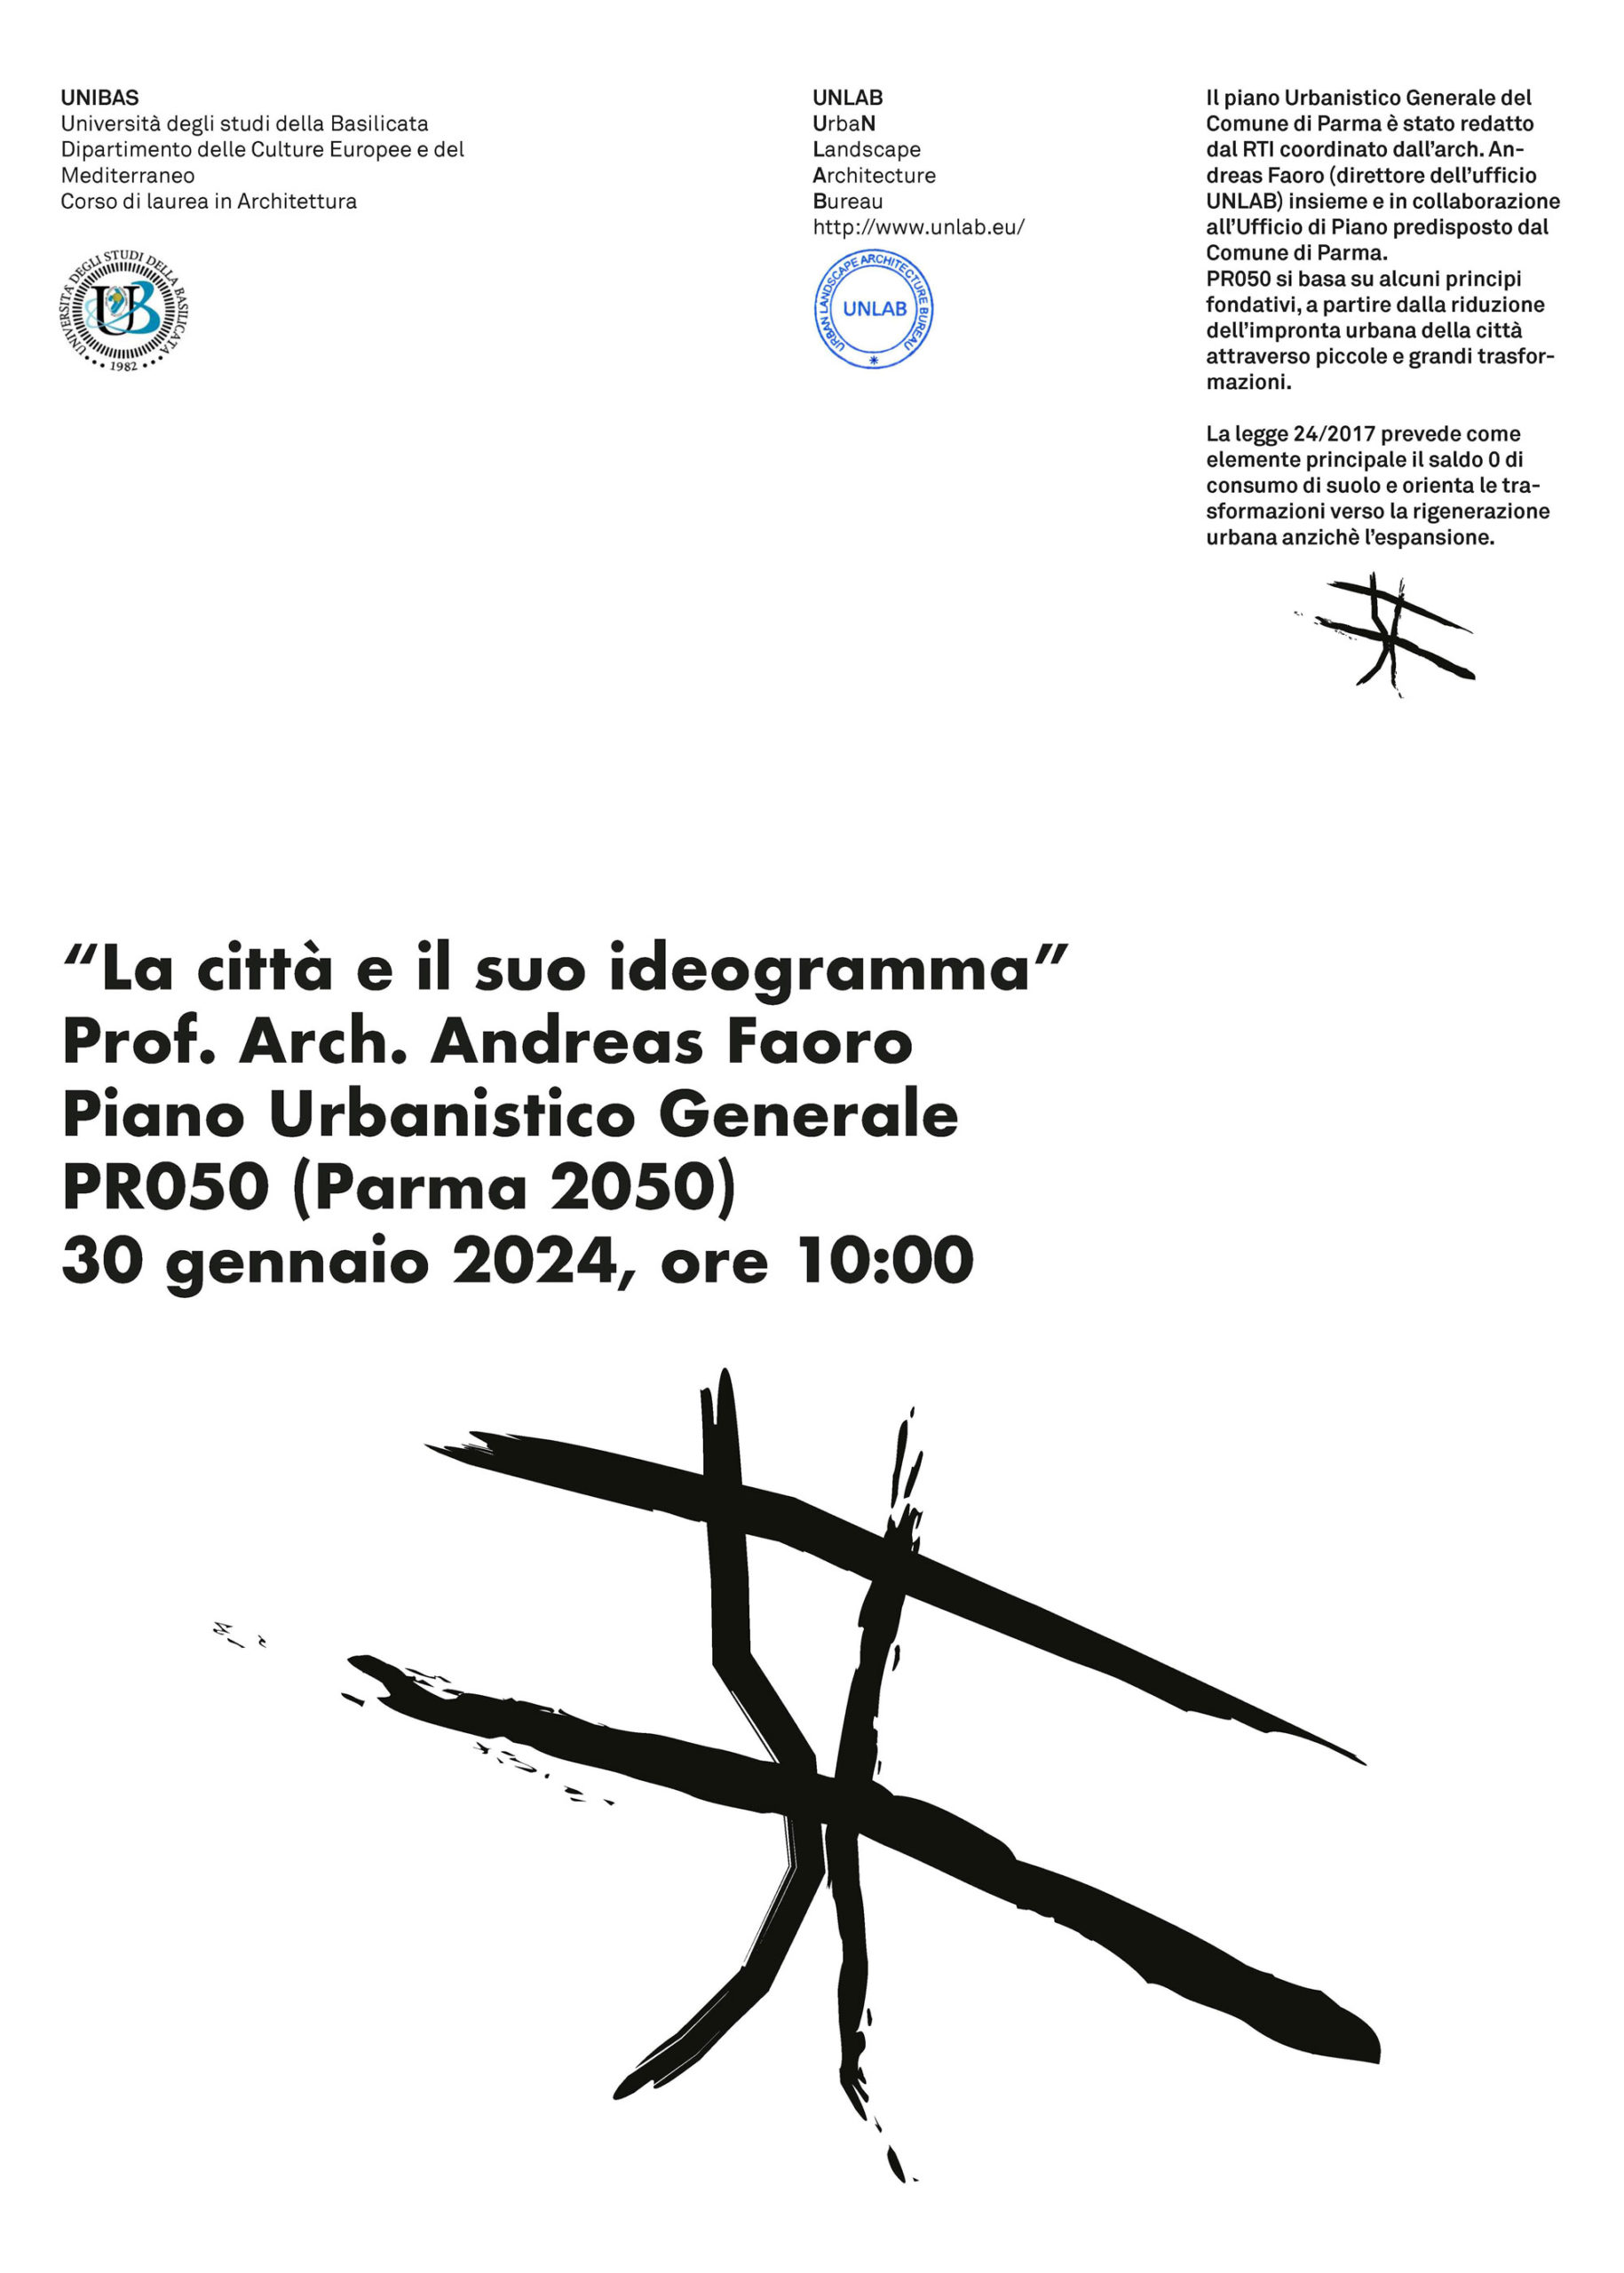 Andreas Faoro lecture at UNIBAS: The City and its Ideogram”